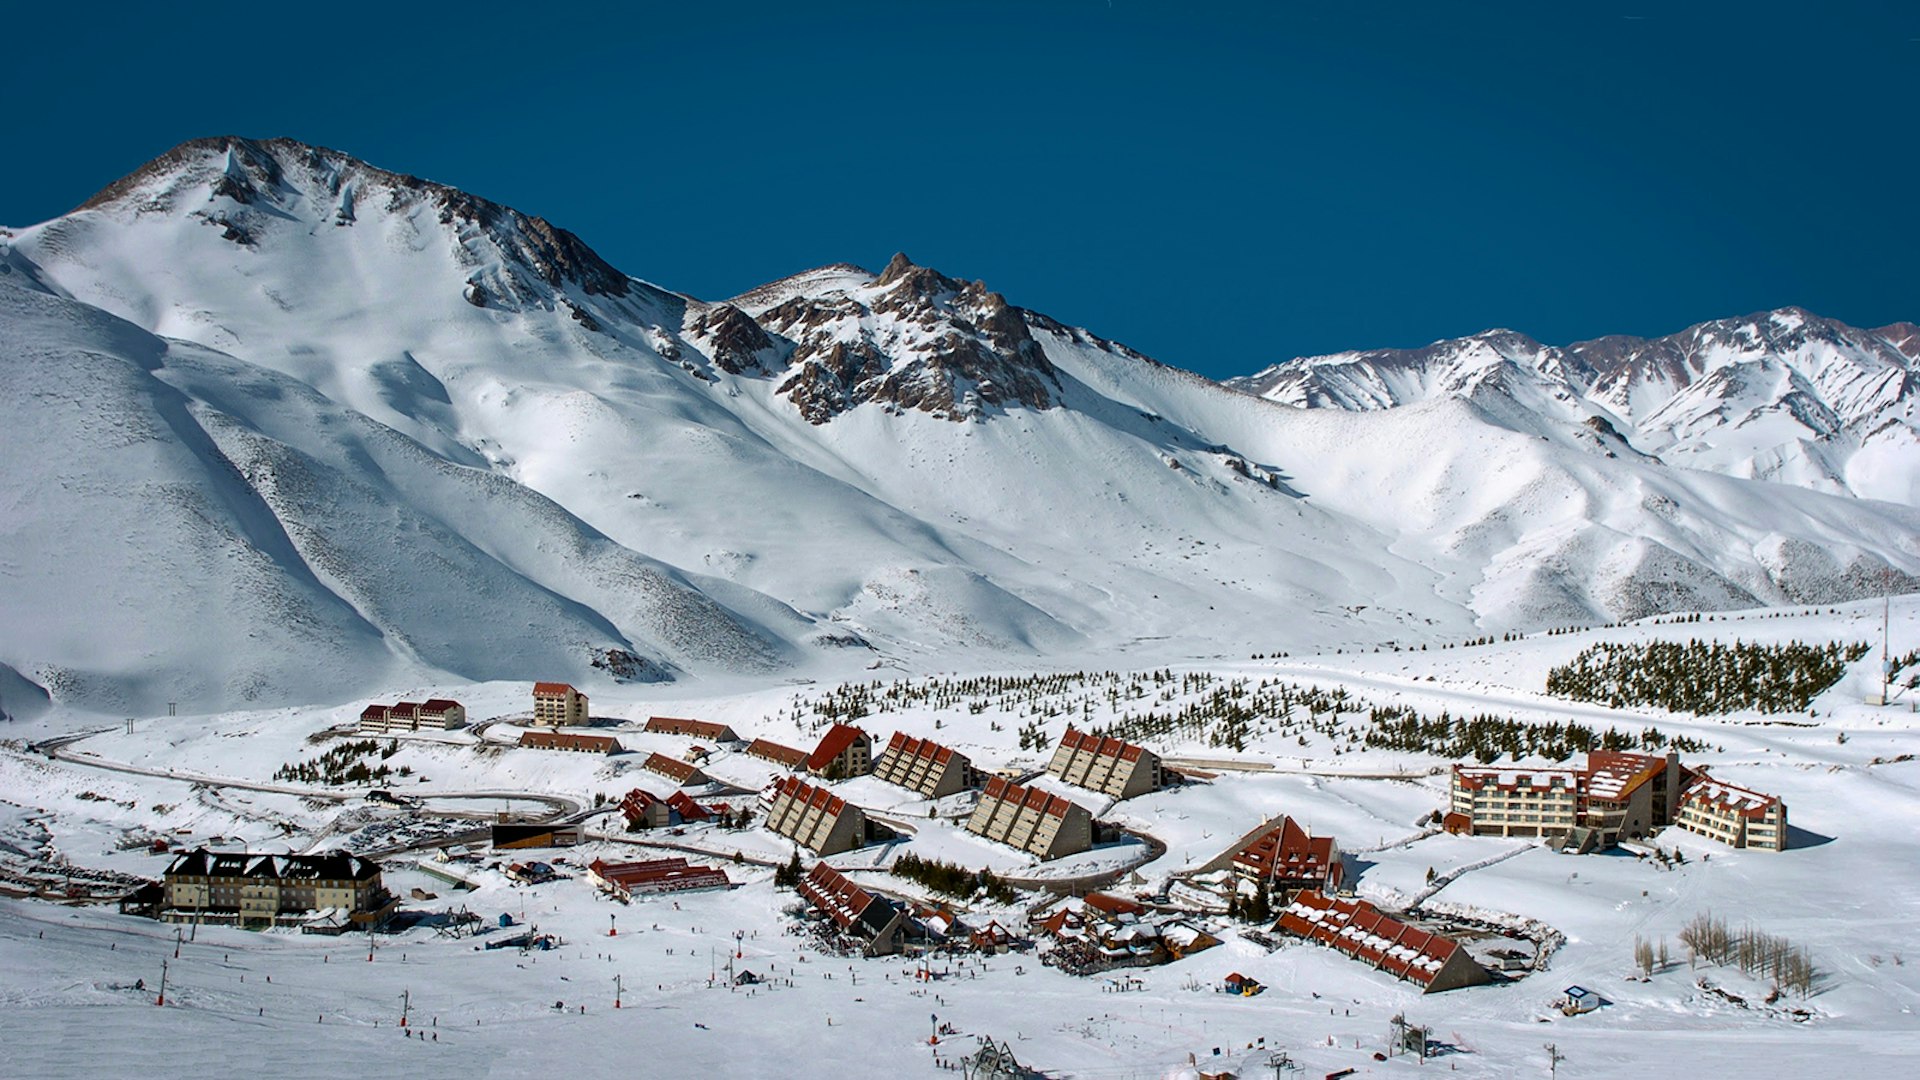 A view of a snow covered mountain range and triangular lodge houses with red roofs at Las Leñas, Argentina